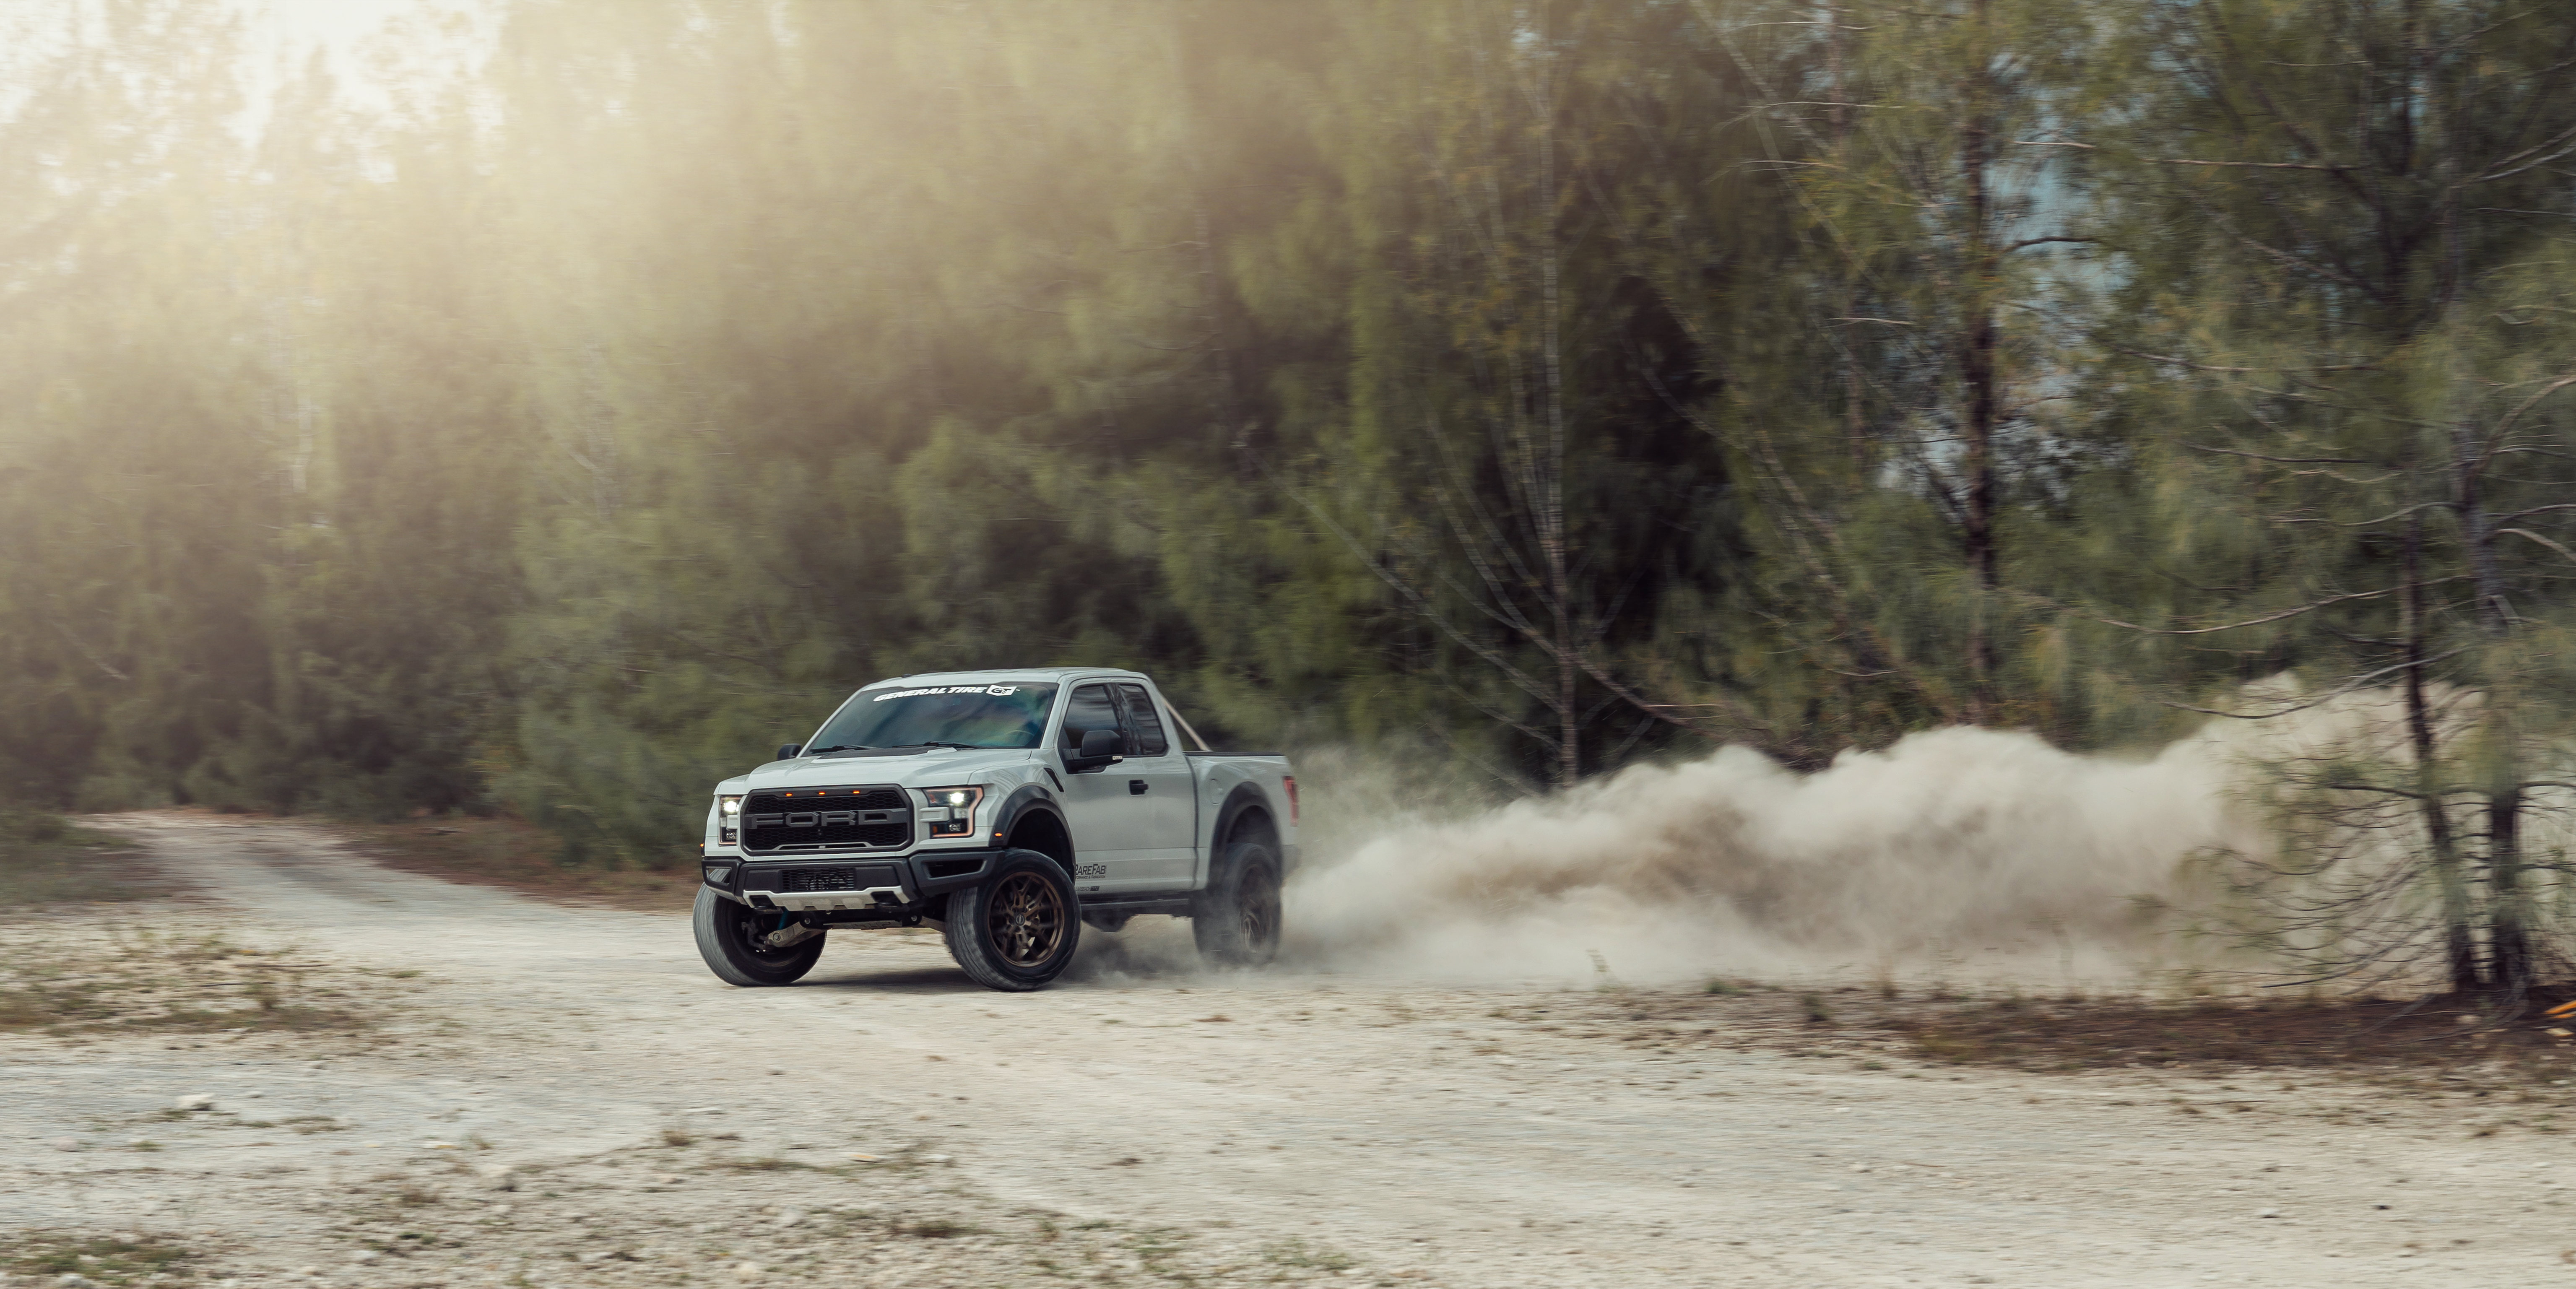 ford raptor, vehicles, drifting, off road, ford